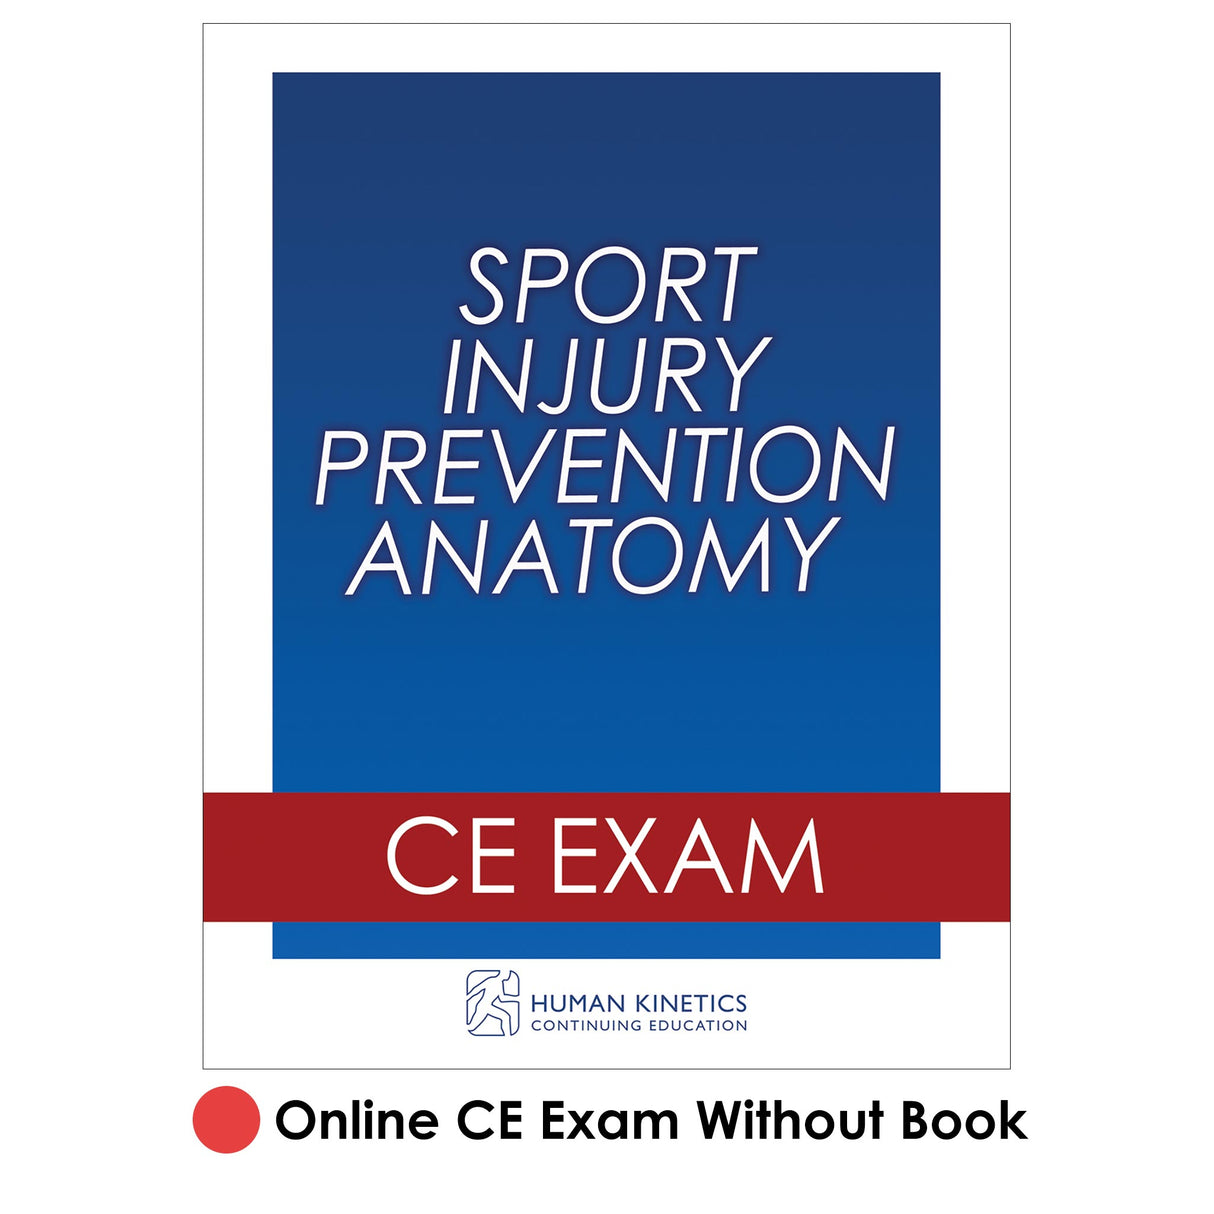 Sport Injury Prevention Anatomy Online CE Exam Without Book